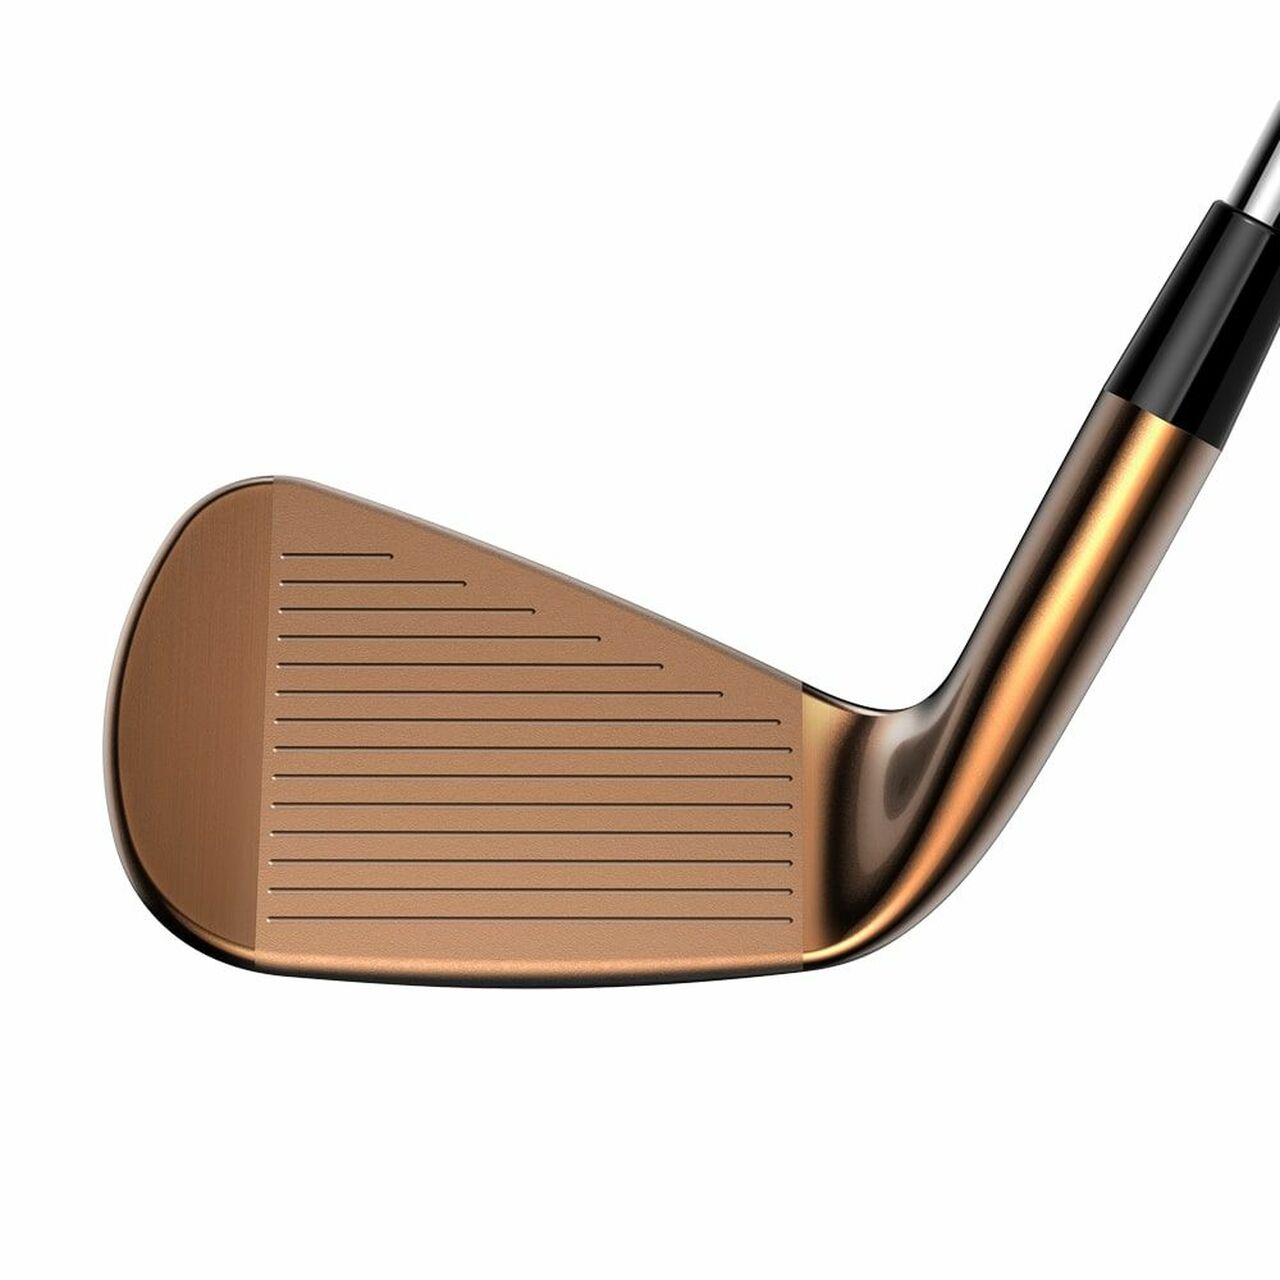 COBRA KING TOUR COPPER IRONS WITH MIM TECHNOLOGY (5-9P)